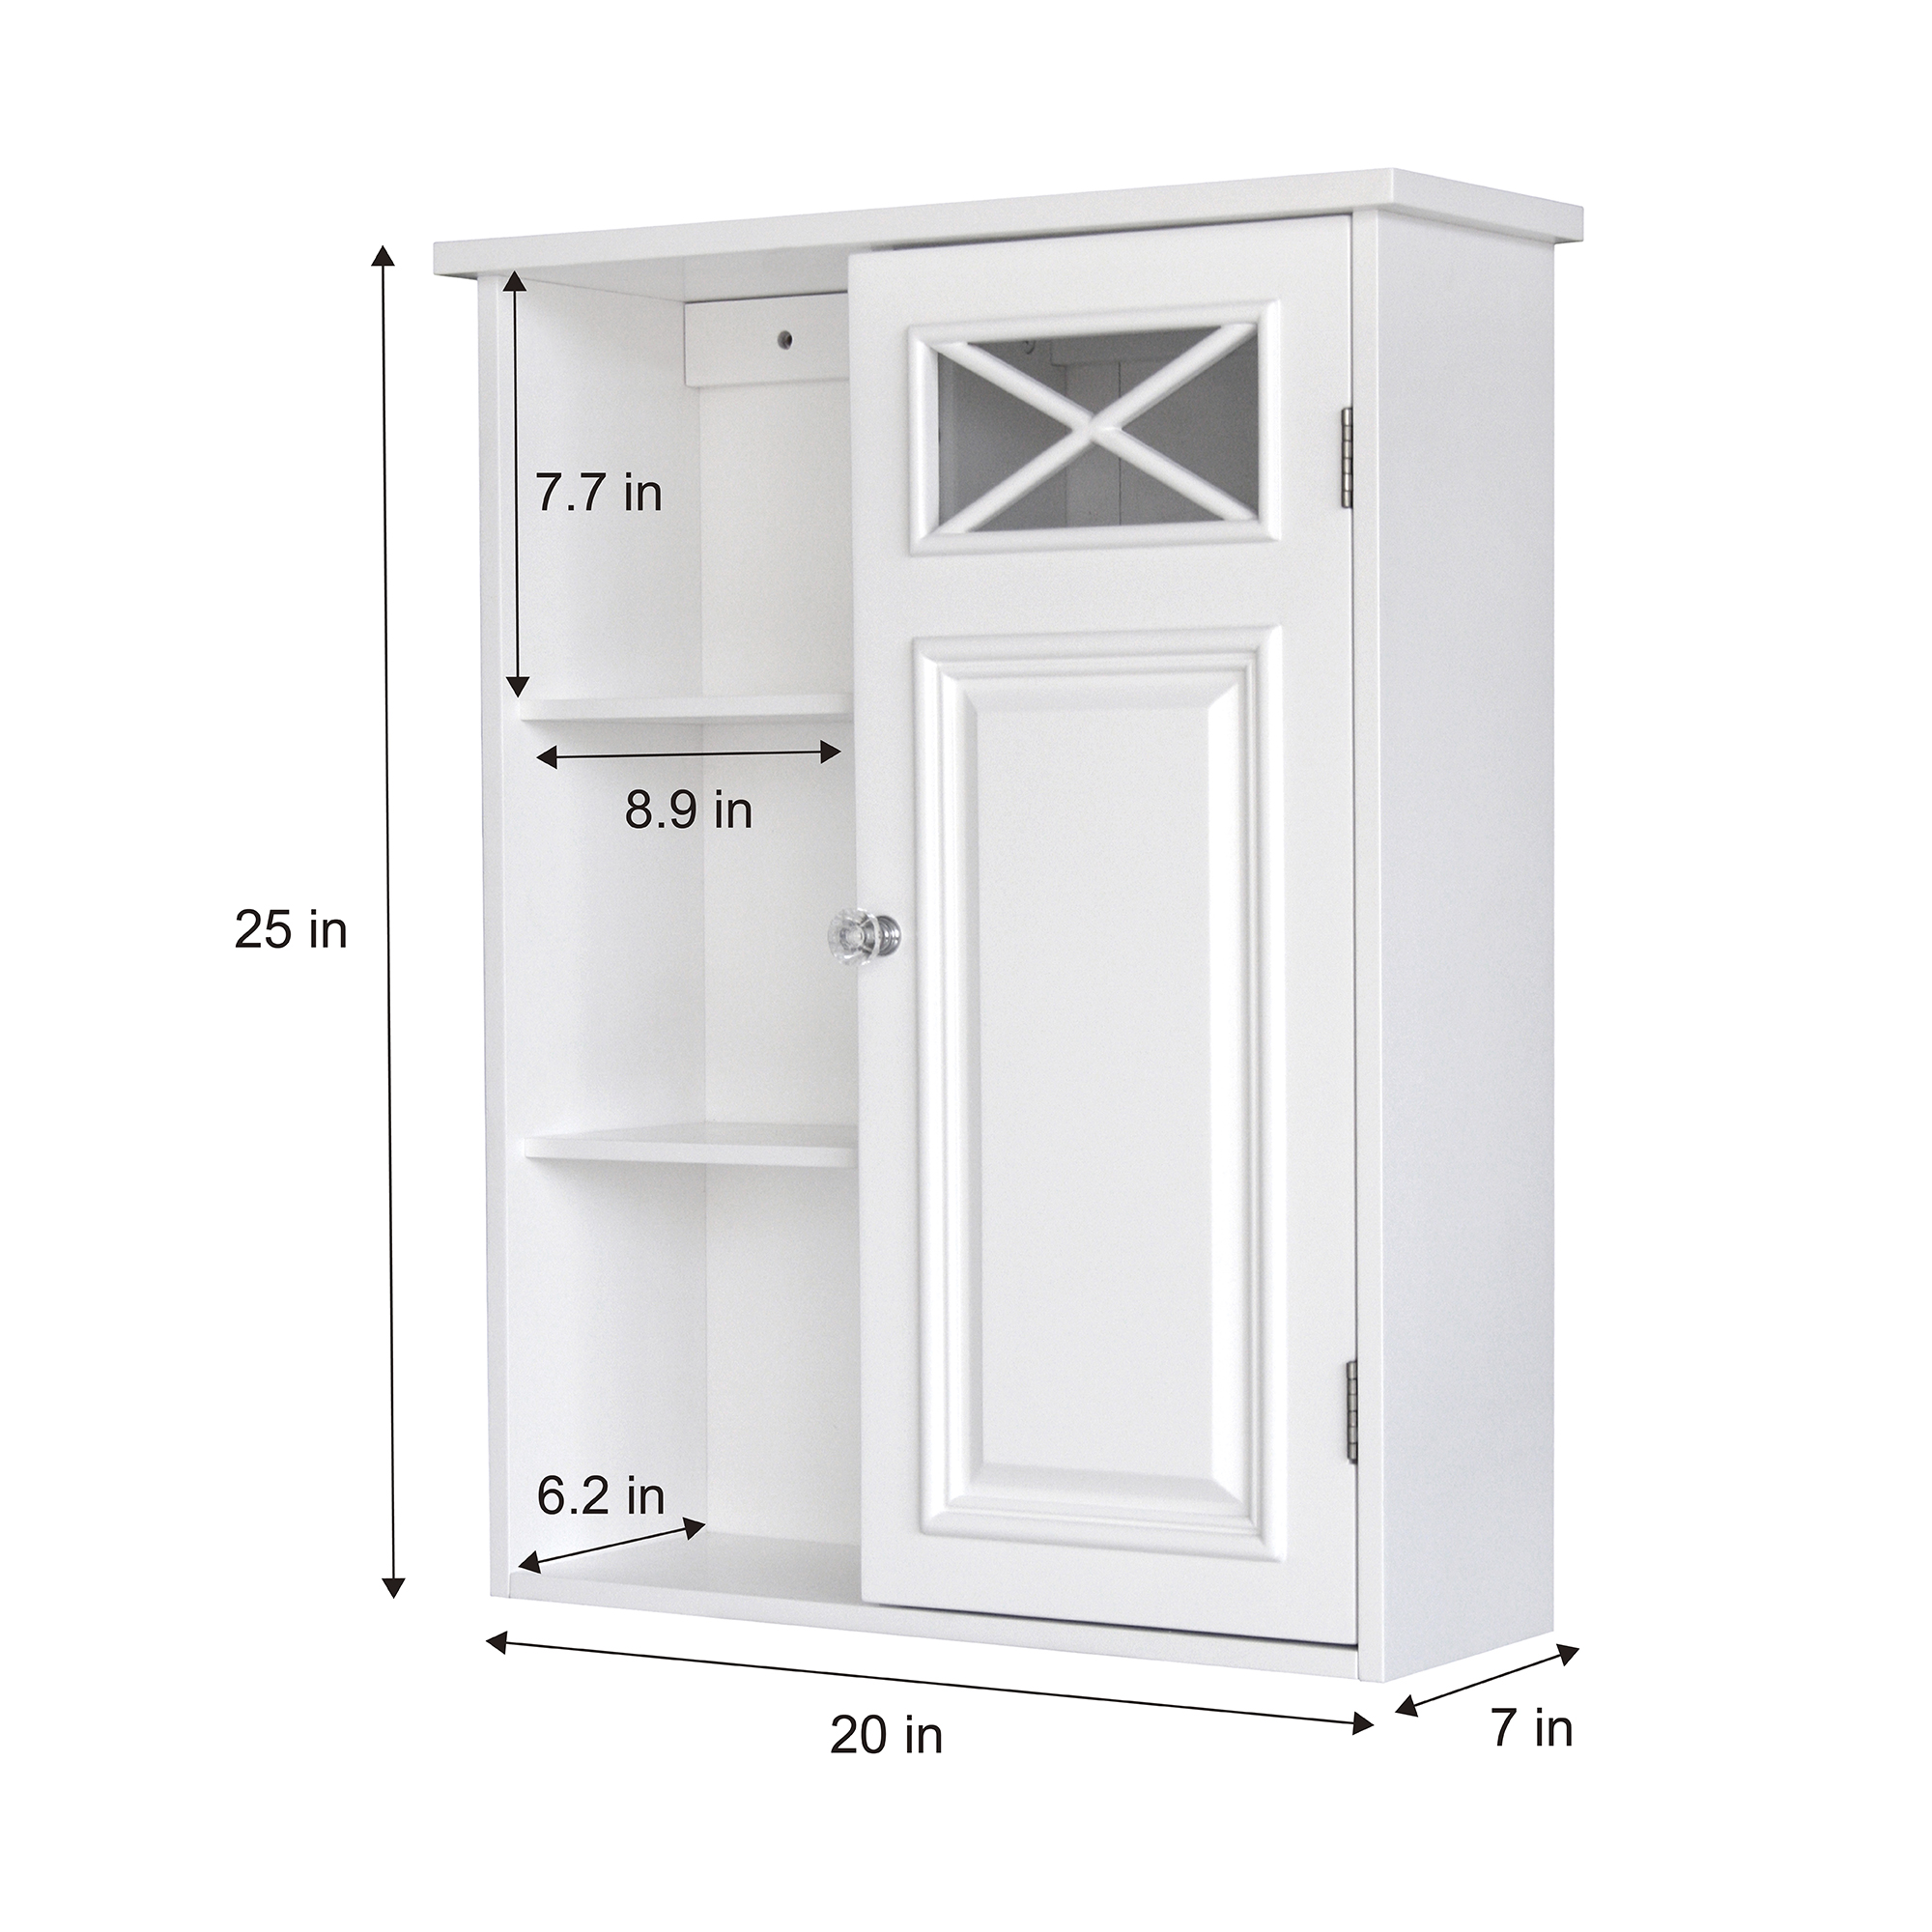 Teamson Home Dawson Removable Wooden Wall Cabinet with Cross Molding, White - image 5 of 7